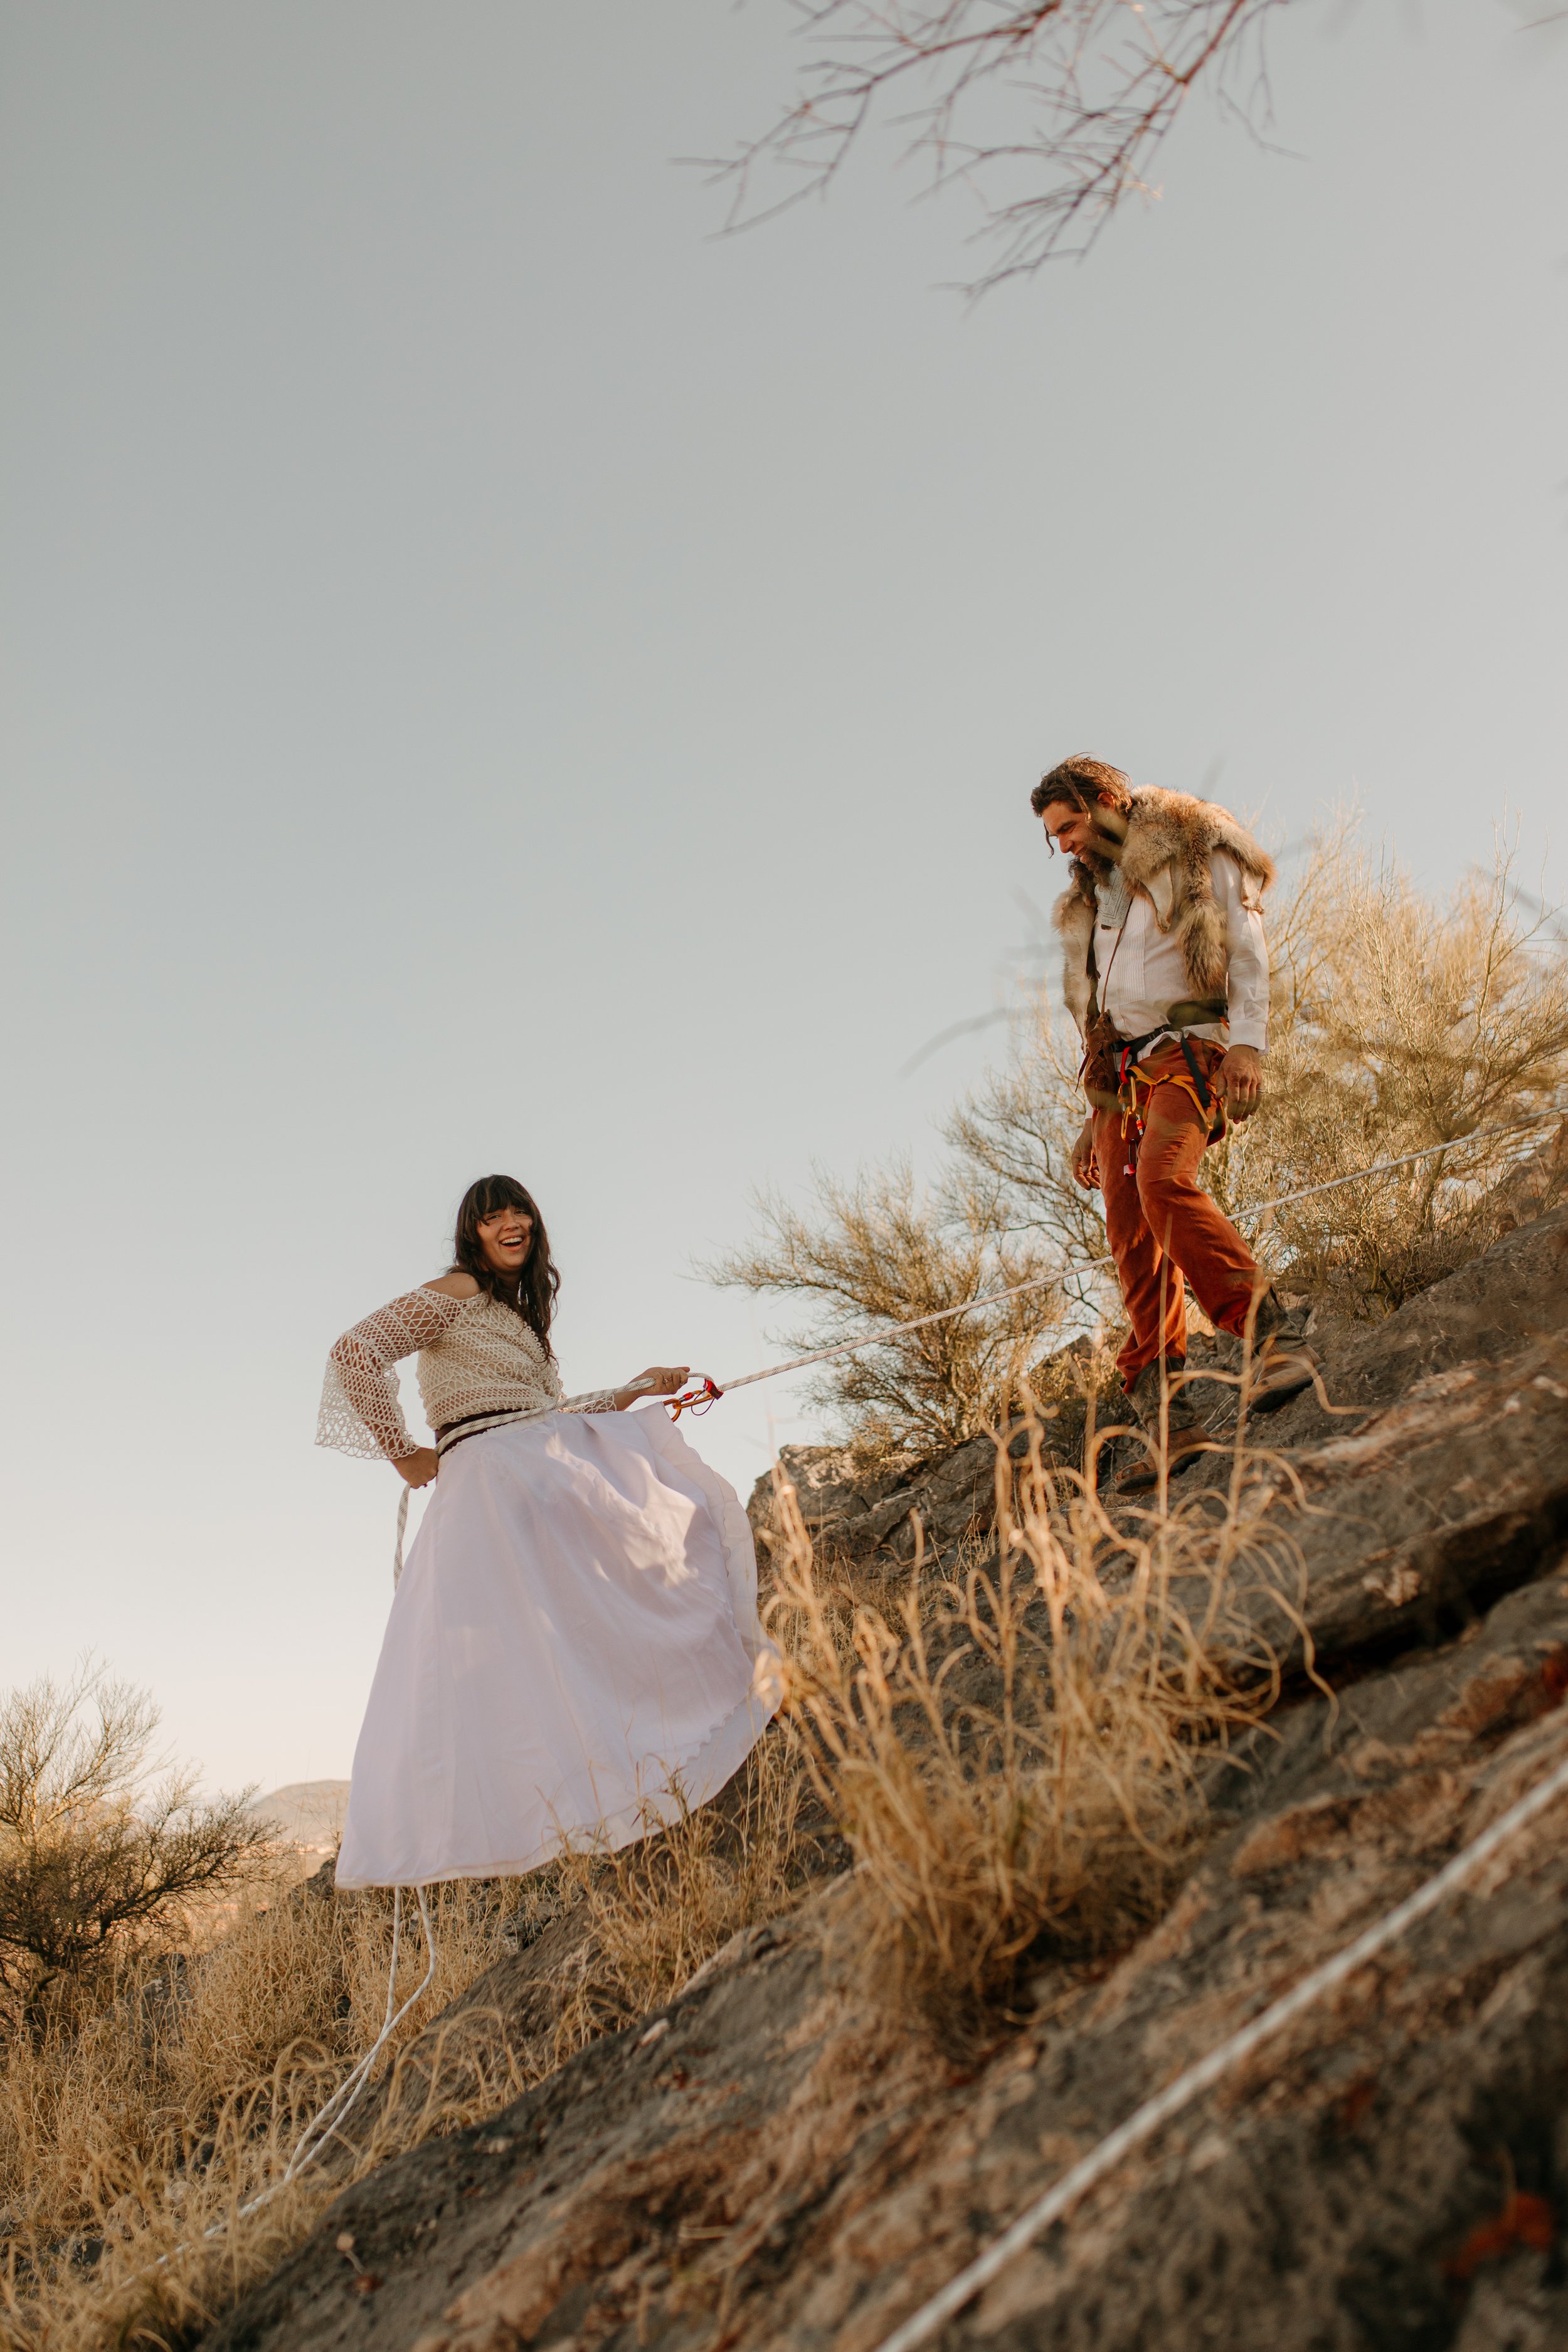 Rappelling Canyoneering Elopement Photos